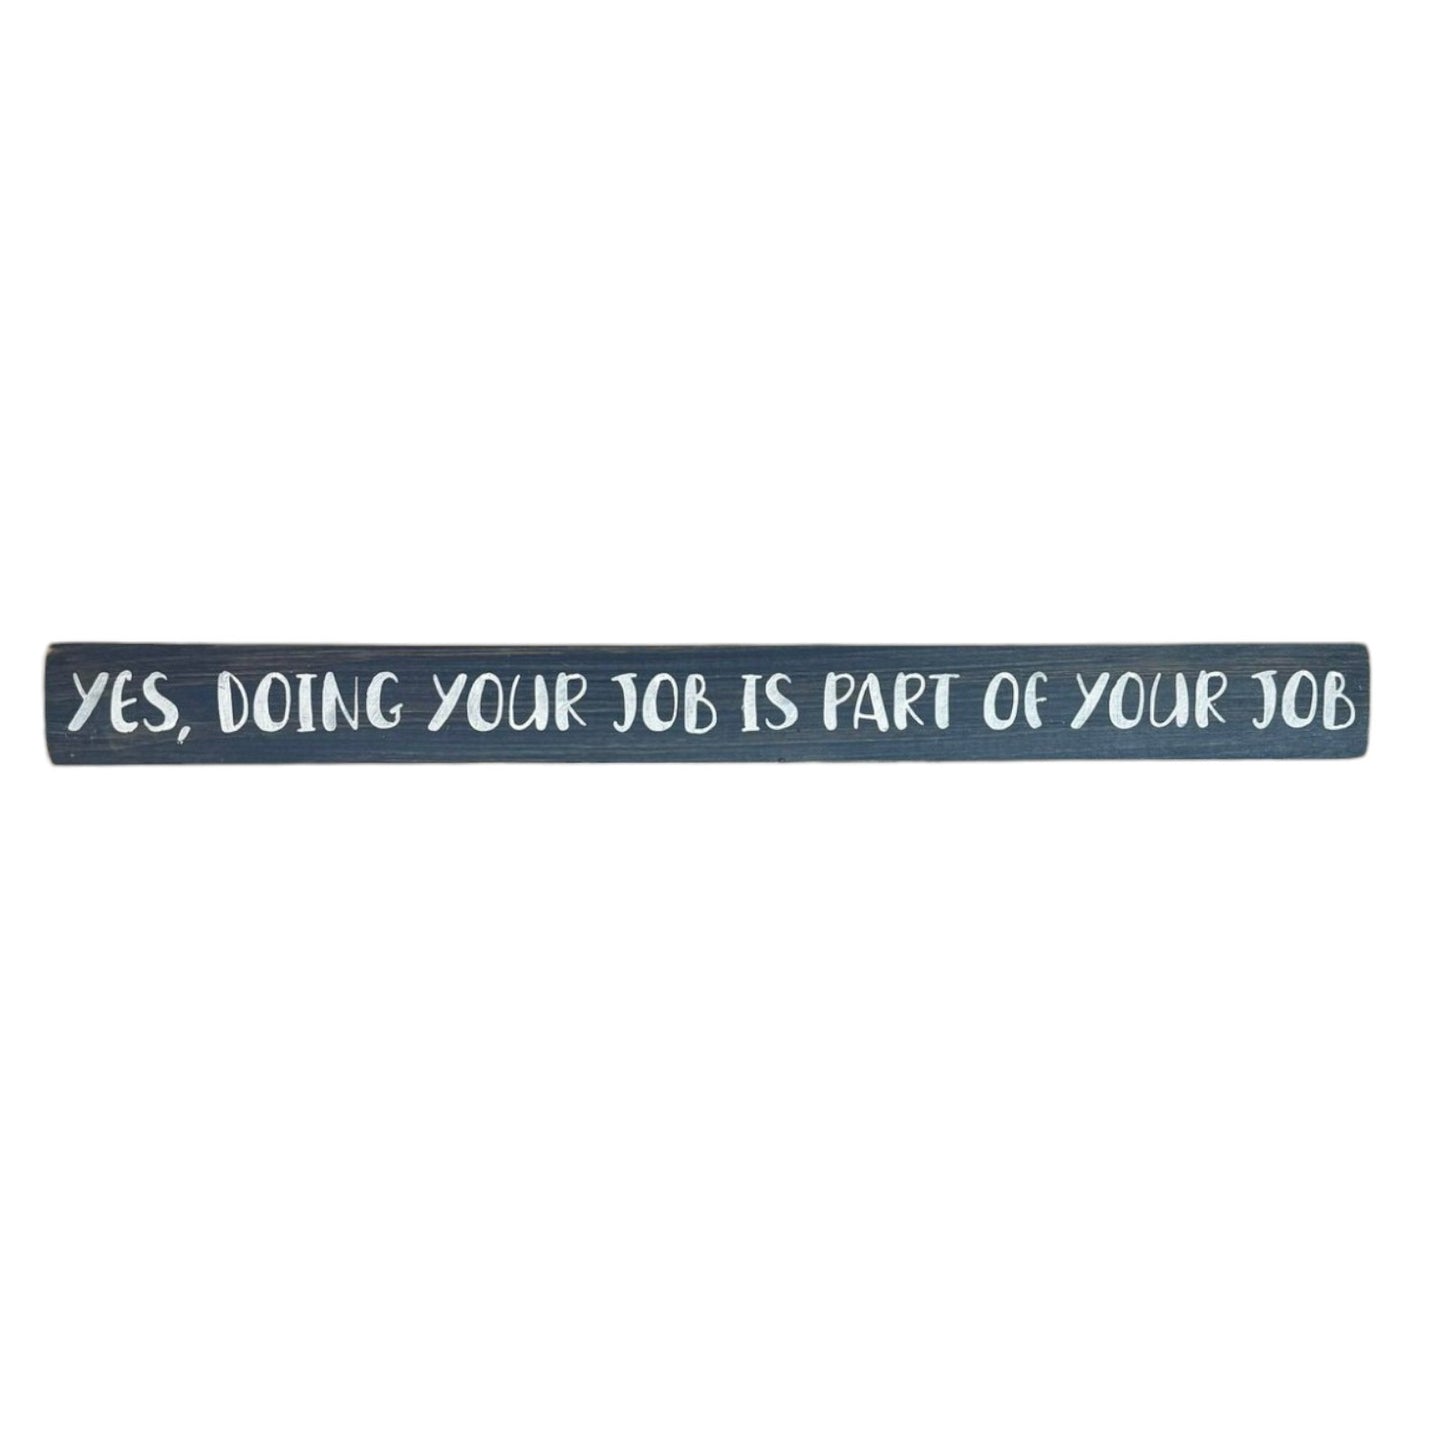 Handpainted bluish-gray wood sign with white text reading 'Yes, Doing Your Job Is Part of Your Job,' freestanding 16-inch funny office decor for desks and shelves.